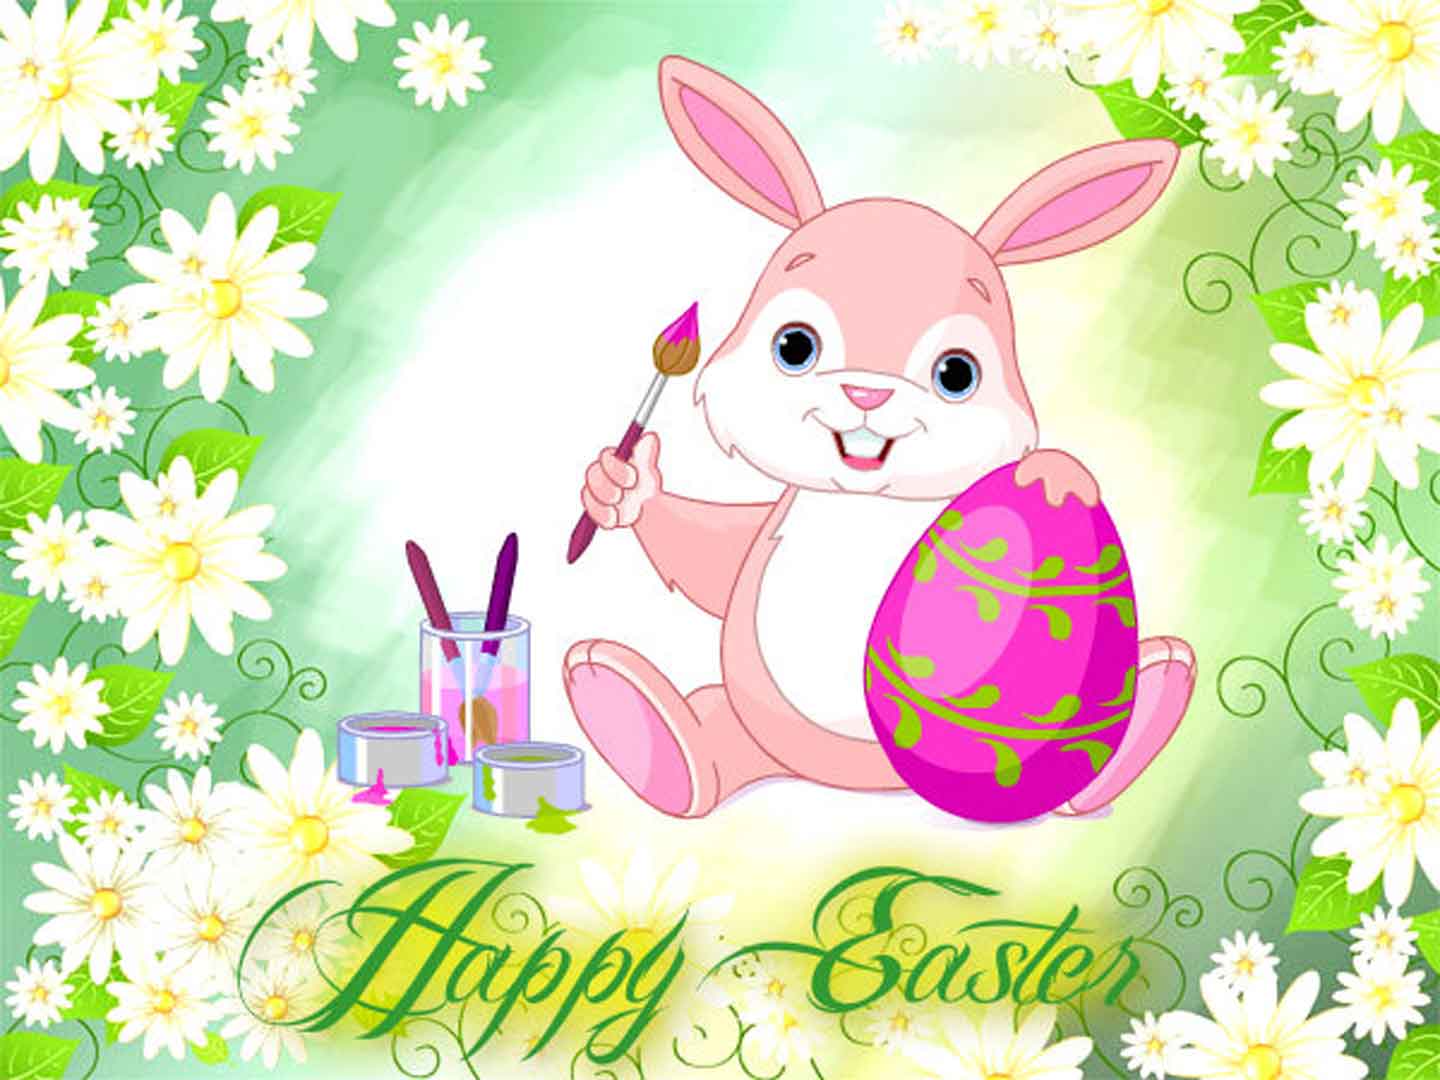 Free download Happy Easter Wallpaper Picture [1440x1080] for your Desktop, Mobile & Tablet. Explore Easter Bunny HD Wallpaper. Easter Bunny HD Wallpaper, Easter Bunny Background, Easter Bunny Wallpaper